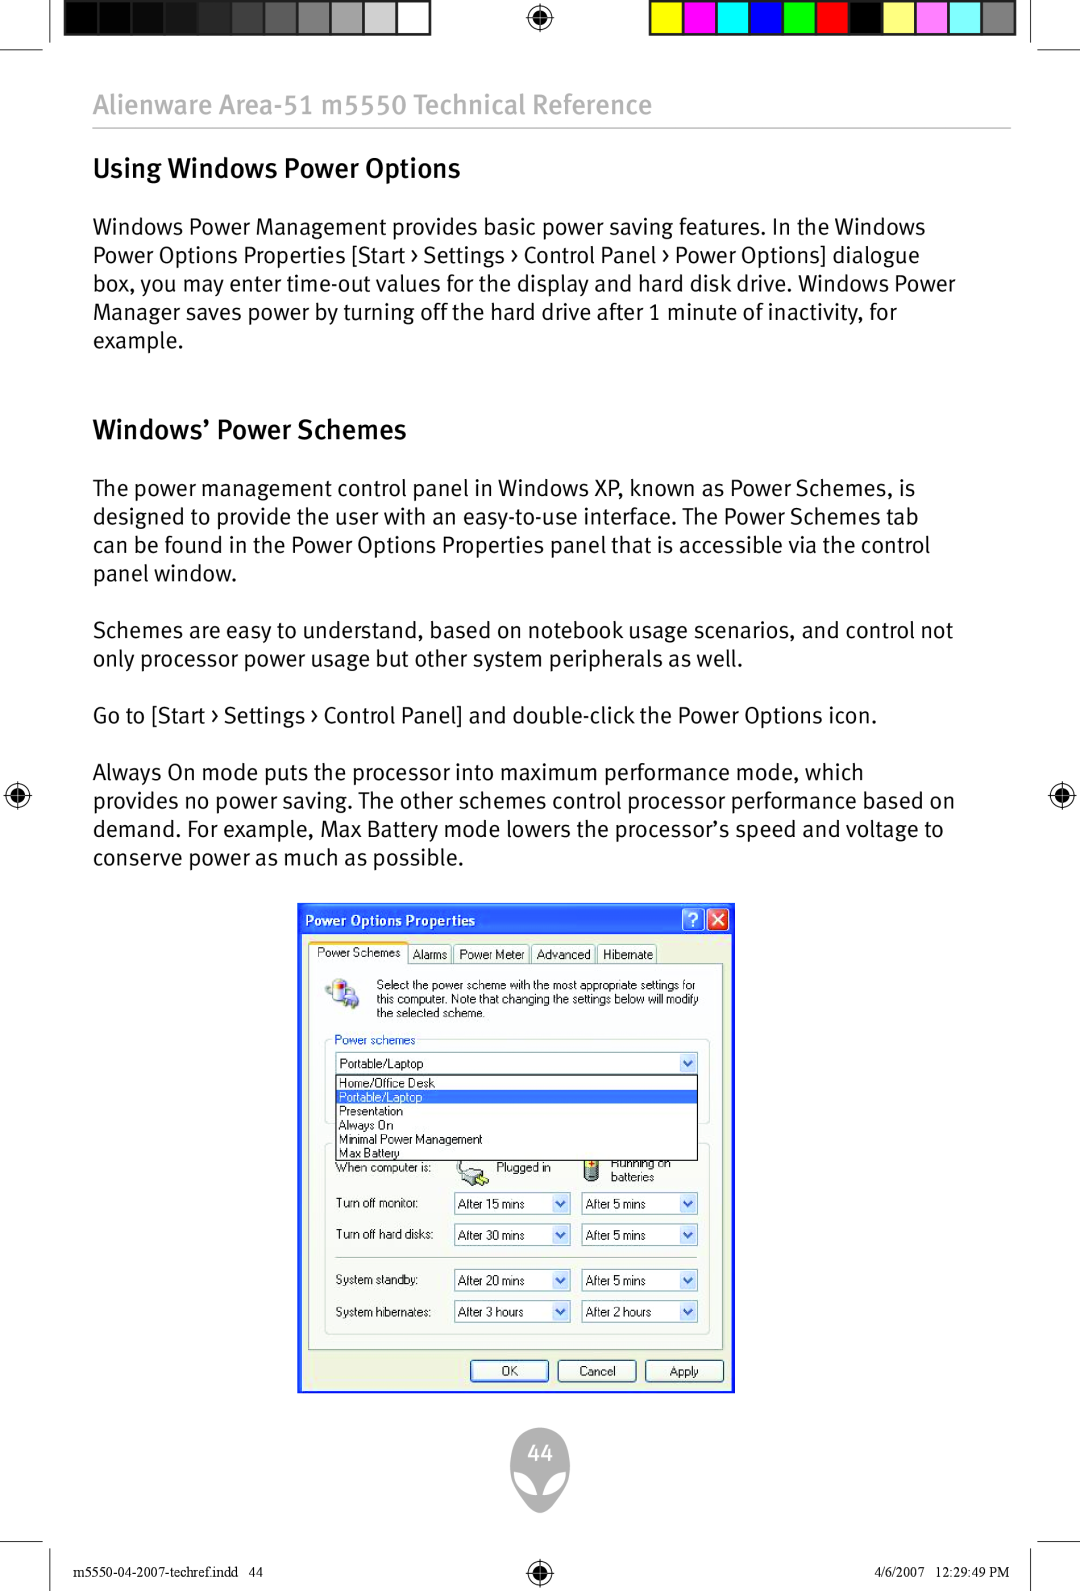 Alienware user manual Using Windows Power Options, Windows’ Power Schemes, Alienware Area-51 m5550 Technical Reference 